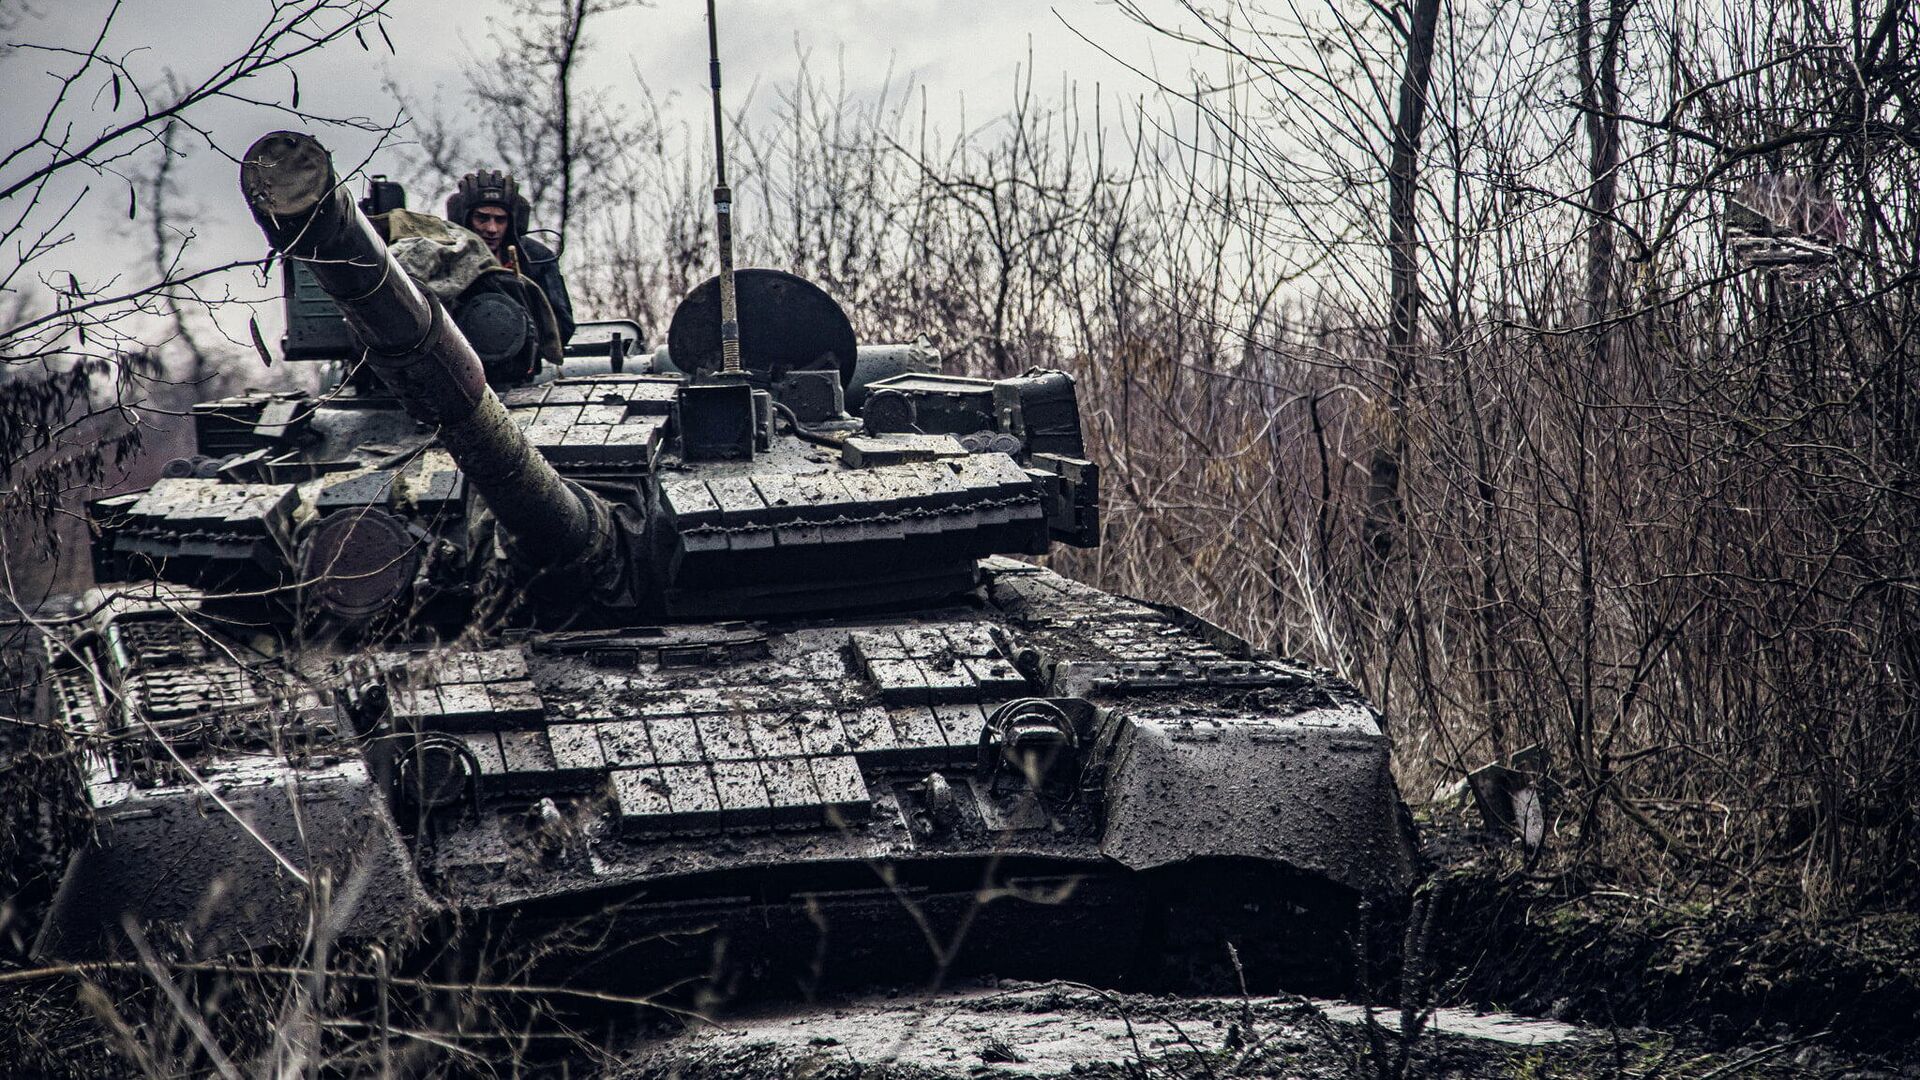 A service member of the Ukrainian Naval Infantry Corps (Marine Corps) rides a tank during drills at a training ground in an unknown location in Ukraine, in this handout picture released February 18, 2022 - Sputnik International, 1920, 25.02.2022